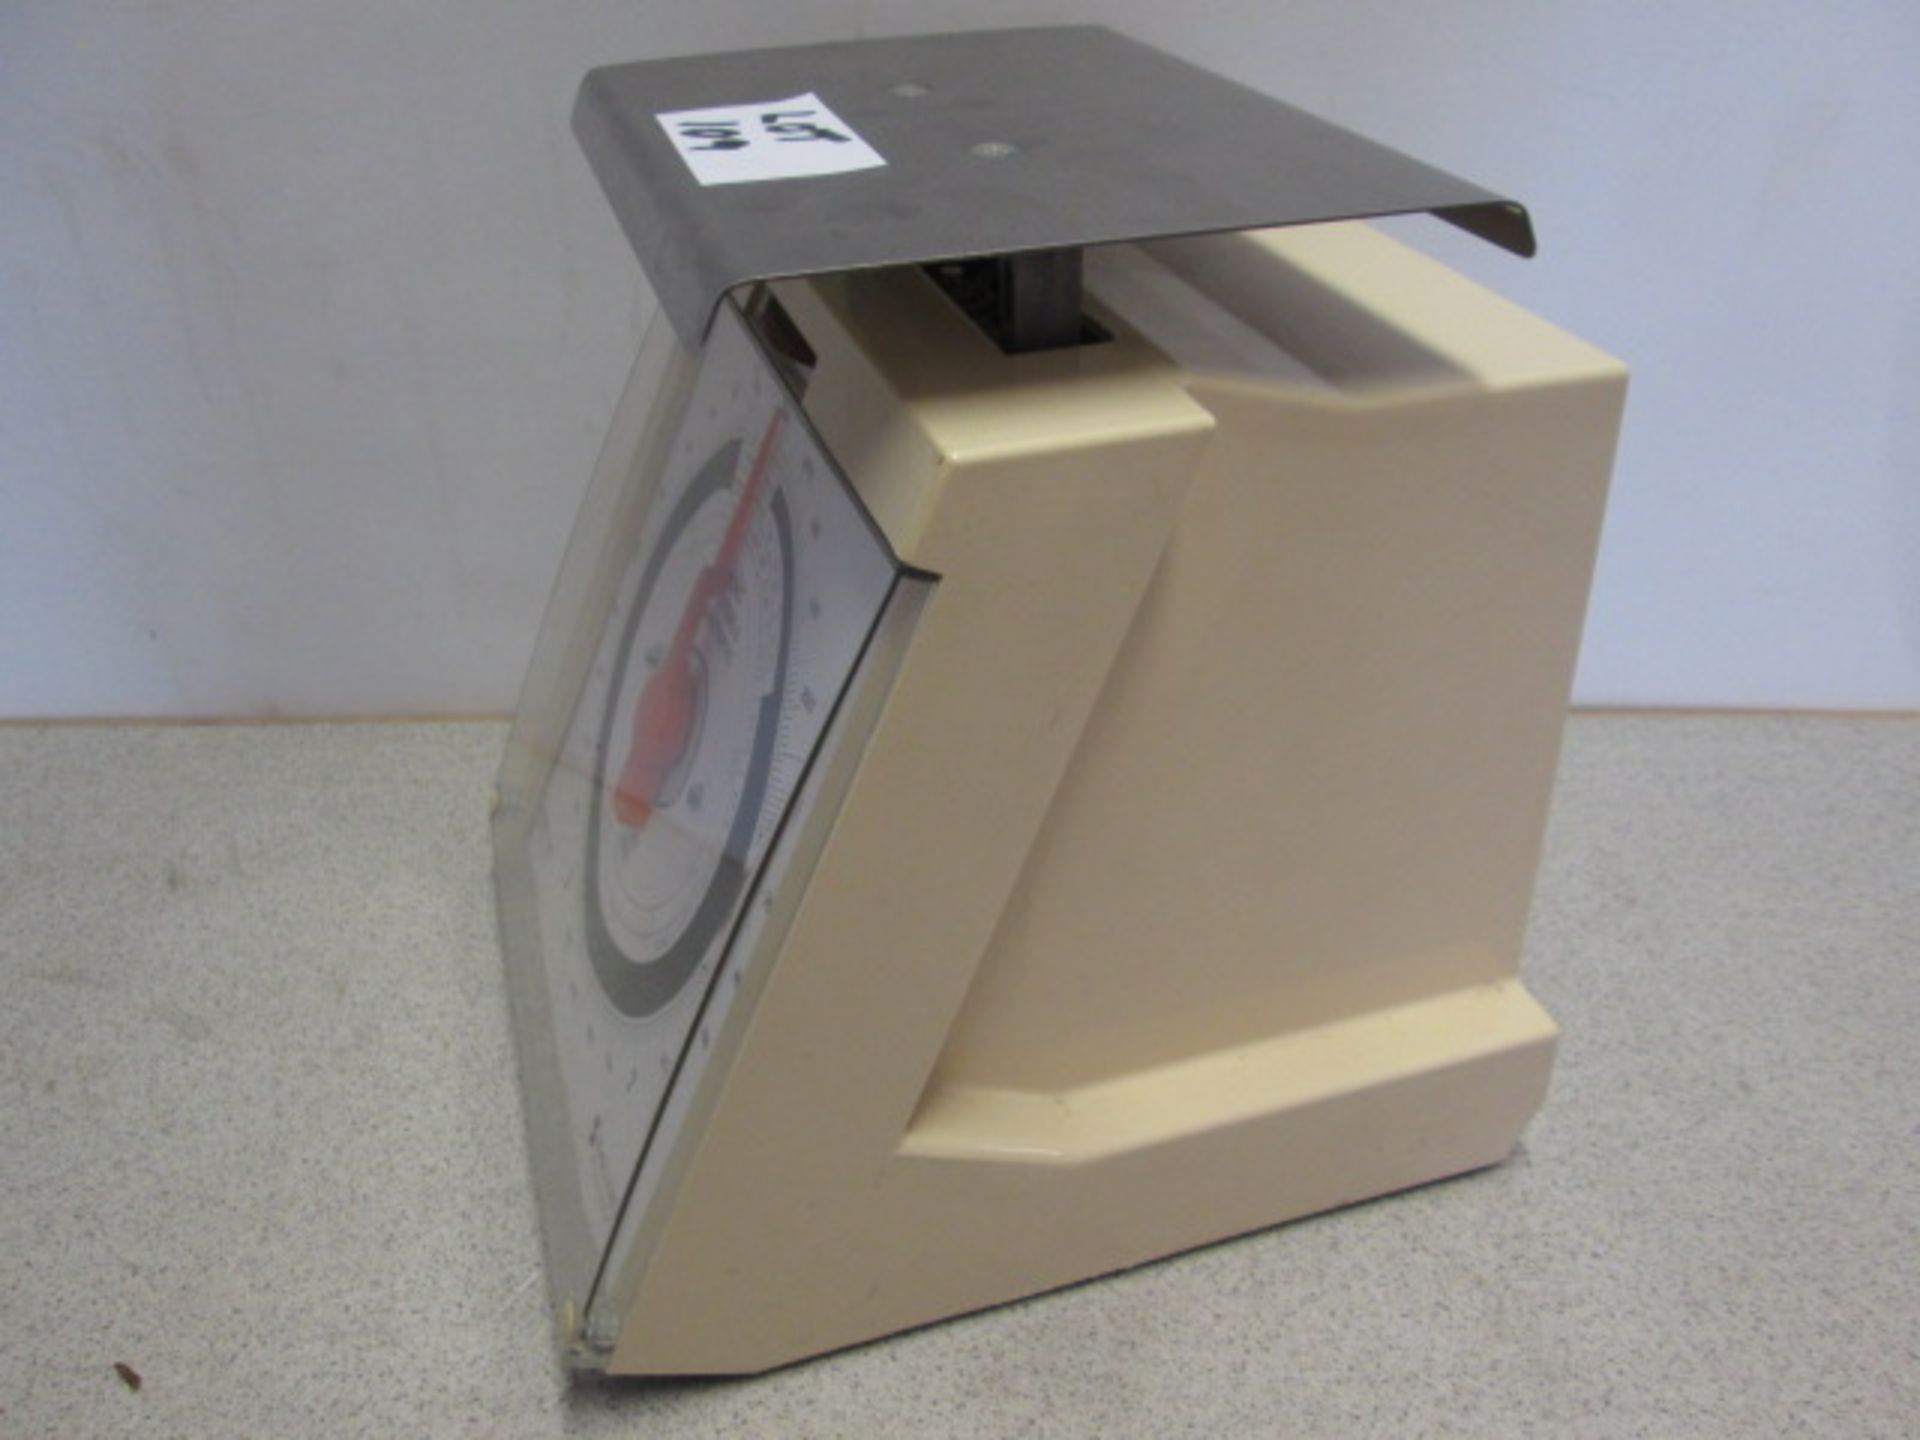 Salter Franking Inland Letters & Standard Parcel Scales, Model 182, Max 5kg - Image 2 of 2